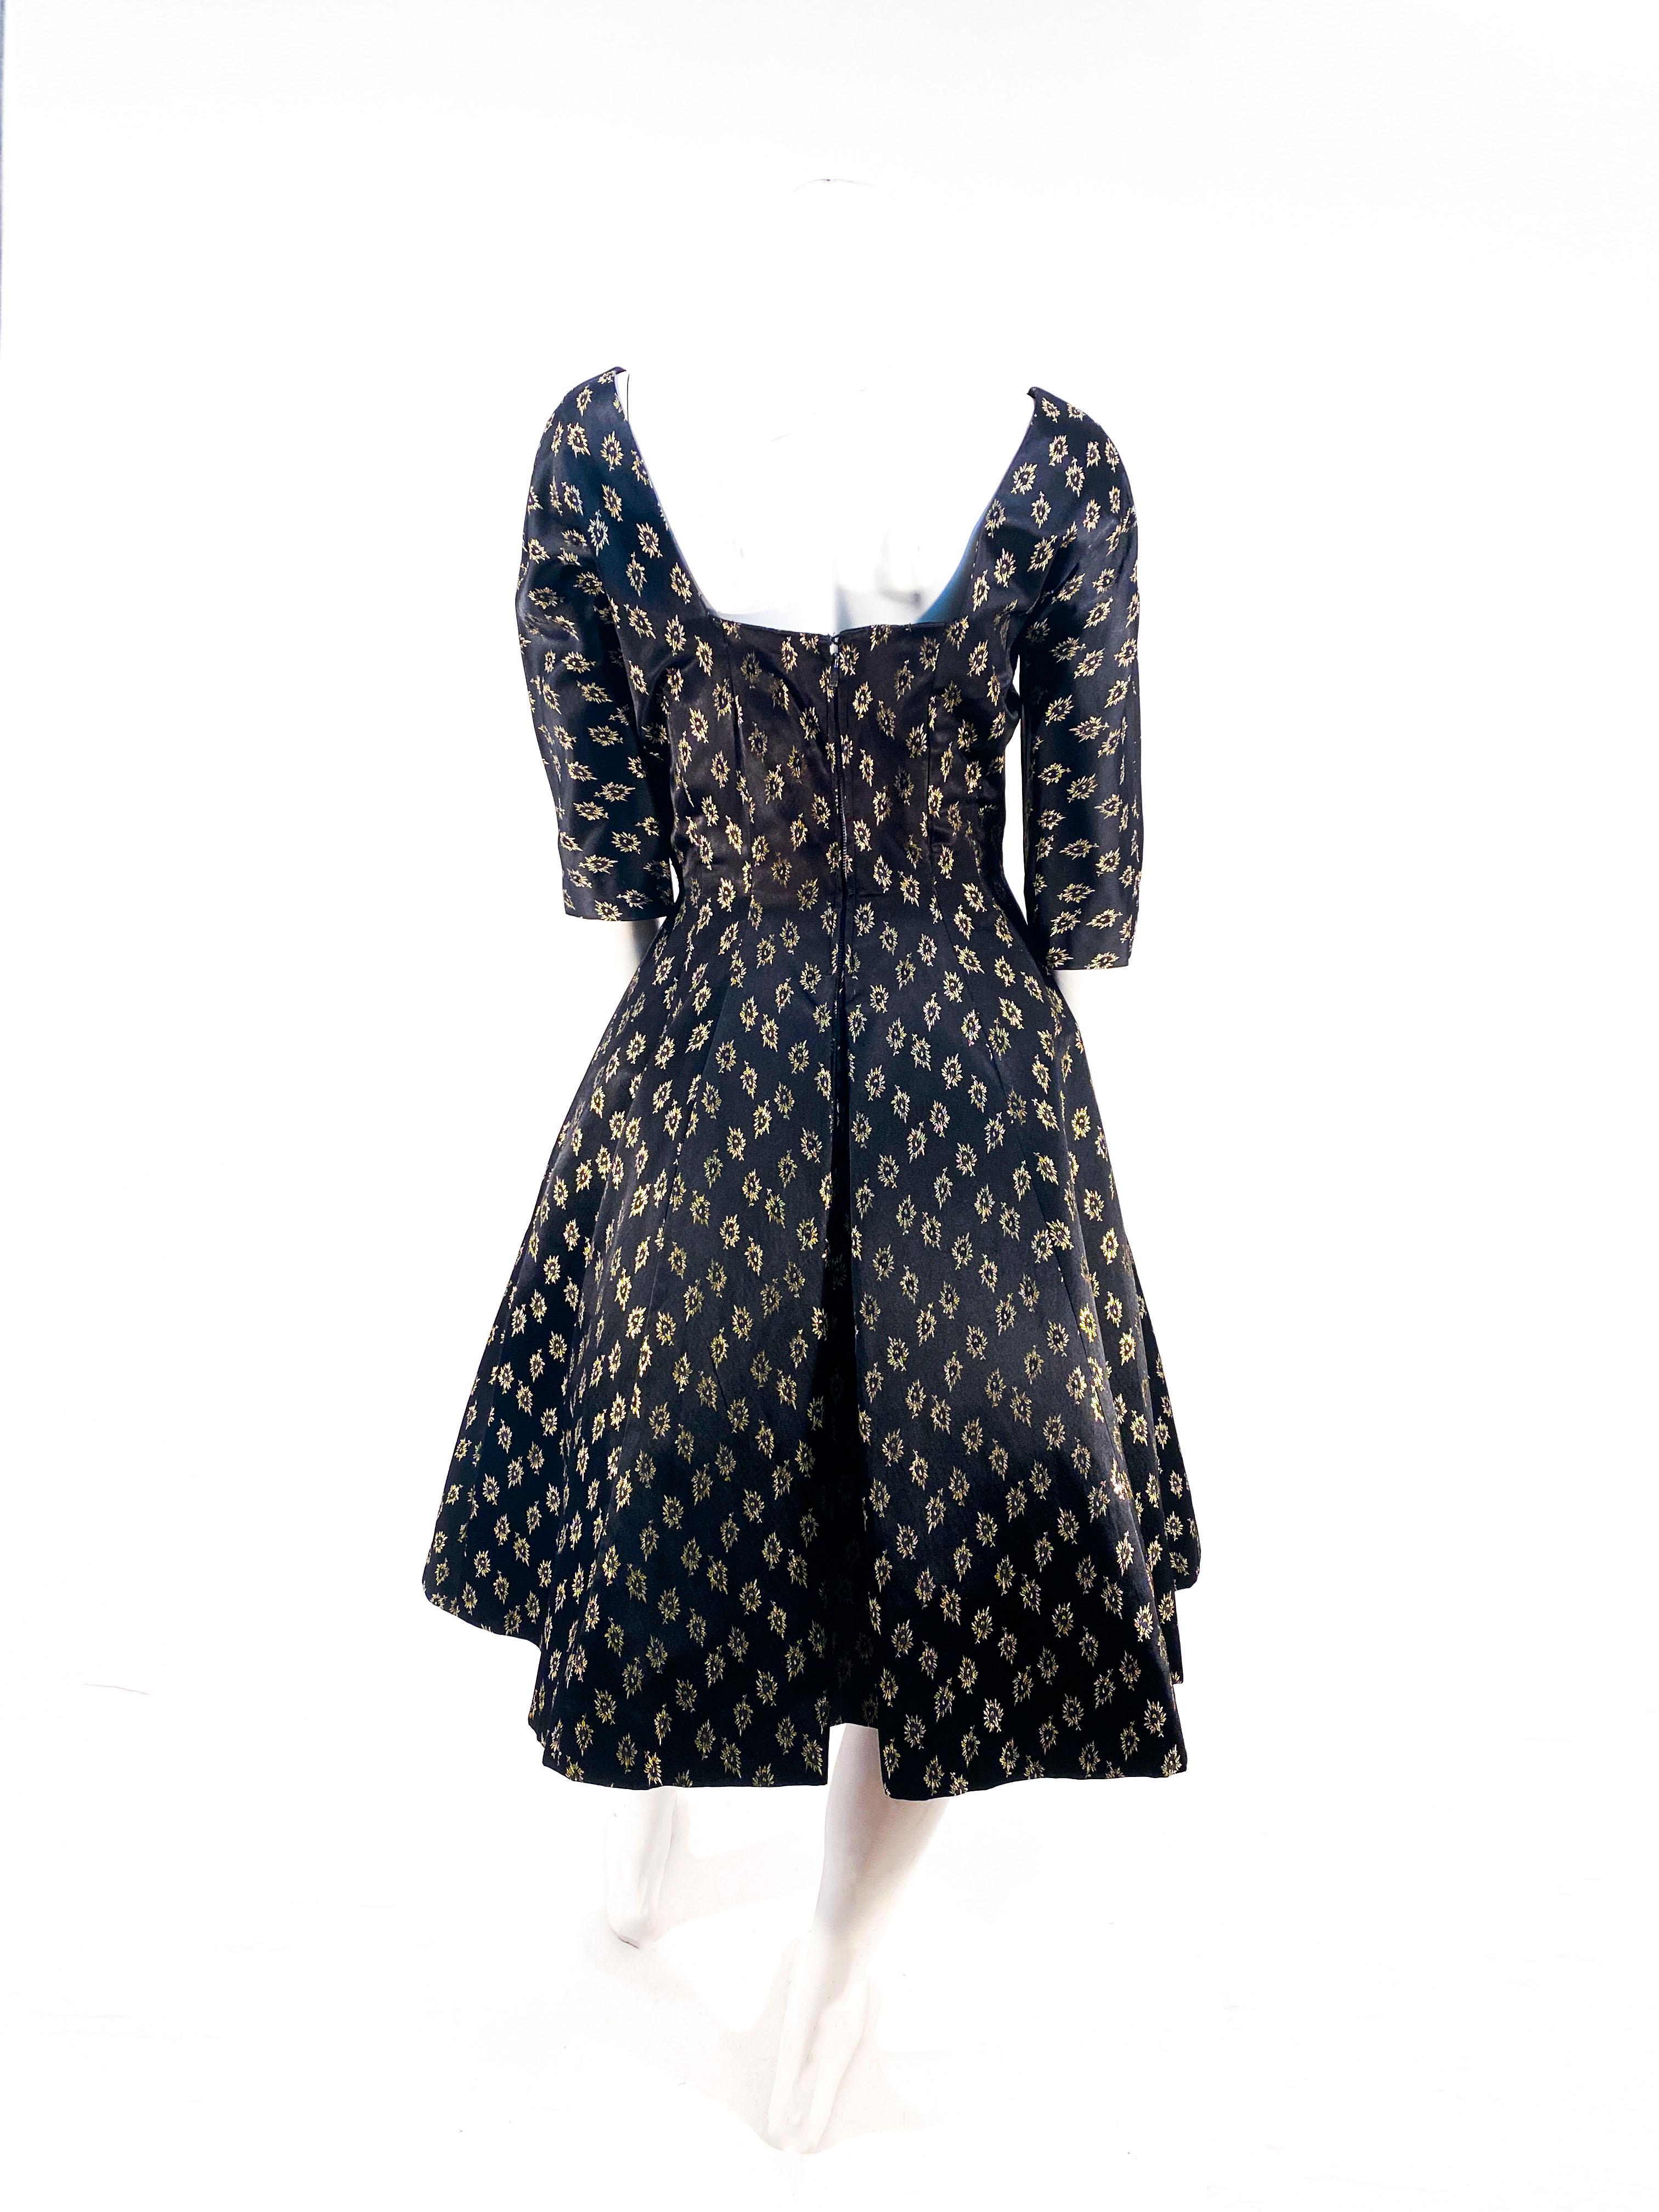 1950s/1960s Suzy Perette Black and Gold Metallic Cocktail Dress In Good Condition For Sale In San Francisco, CA